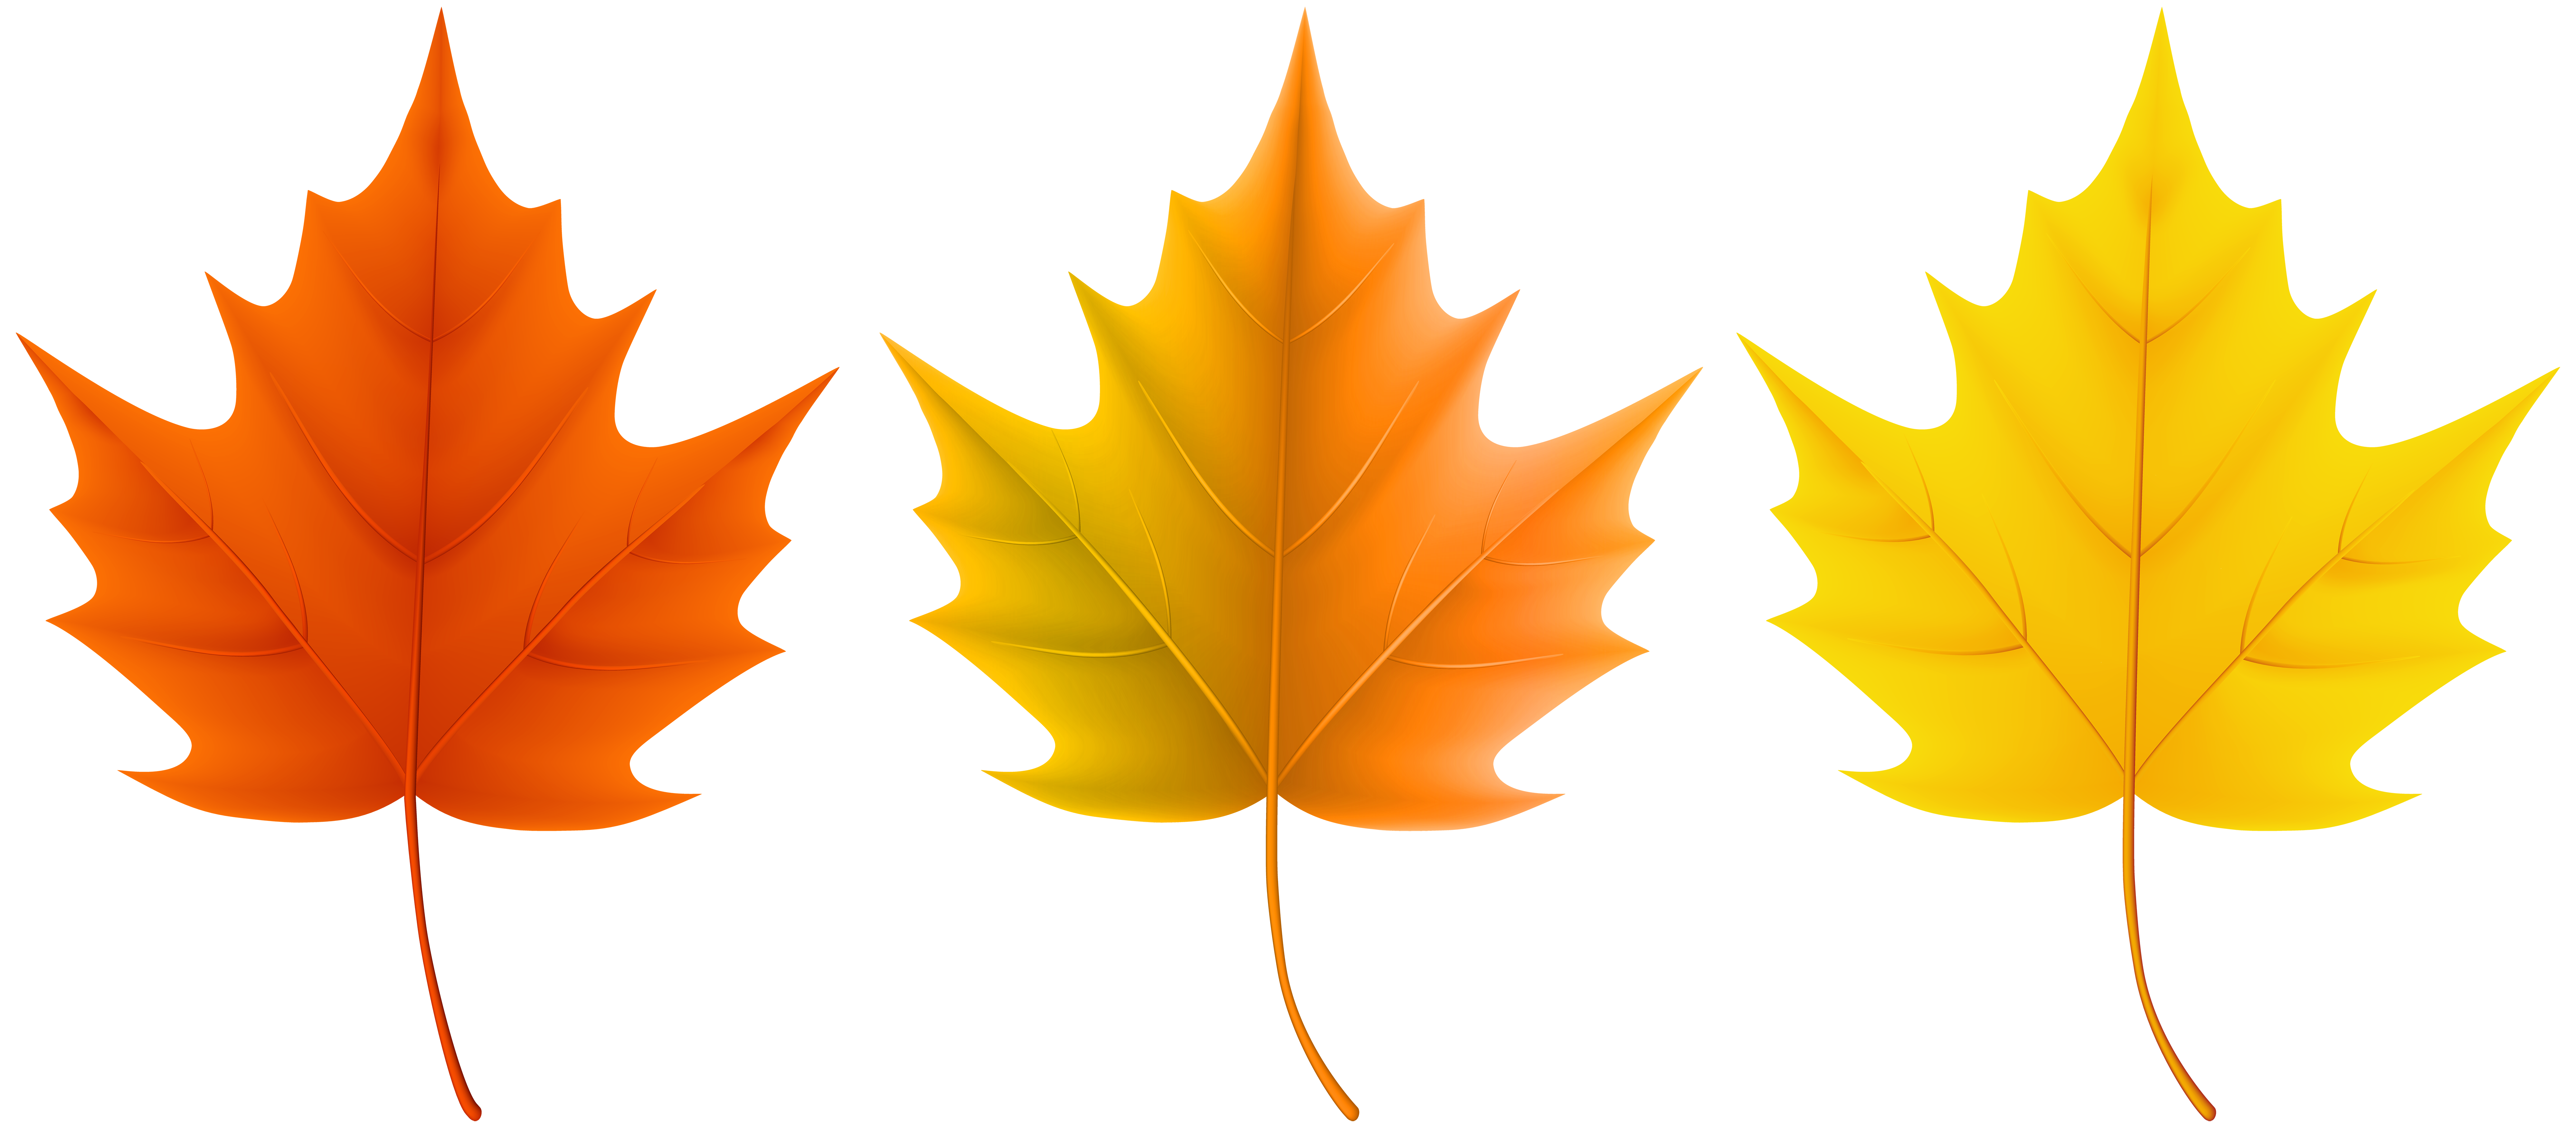 Autumn Leaves Clipart Clip Art Library Png Maple Leaf